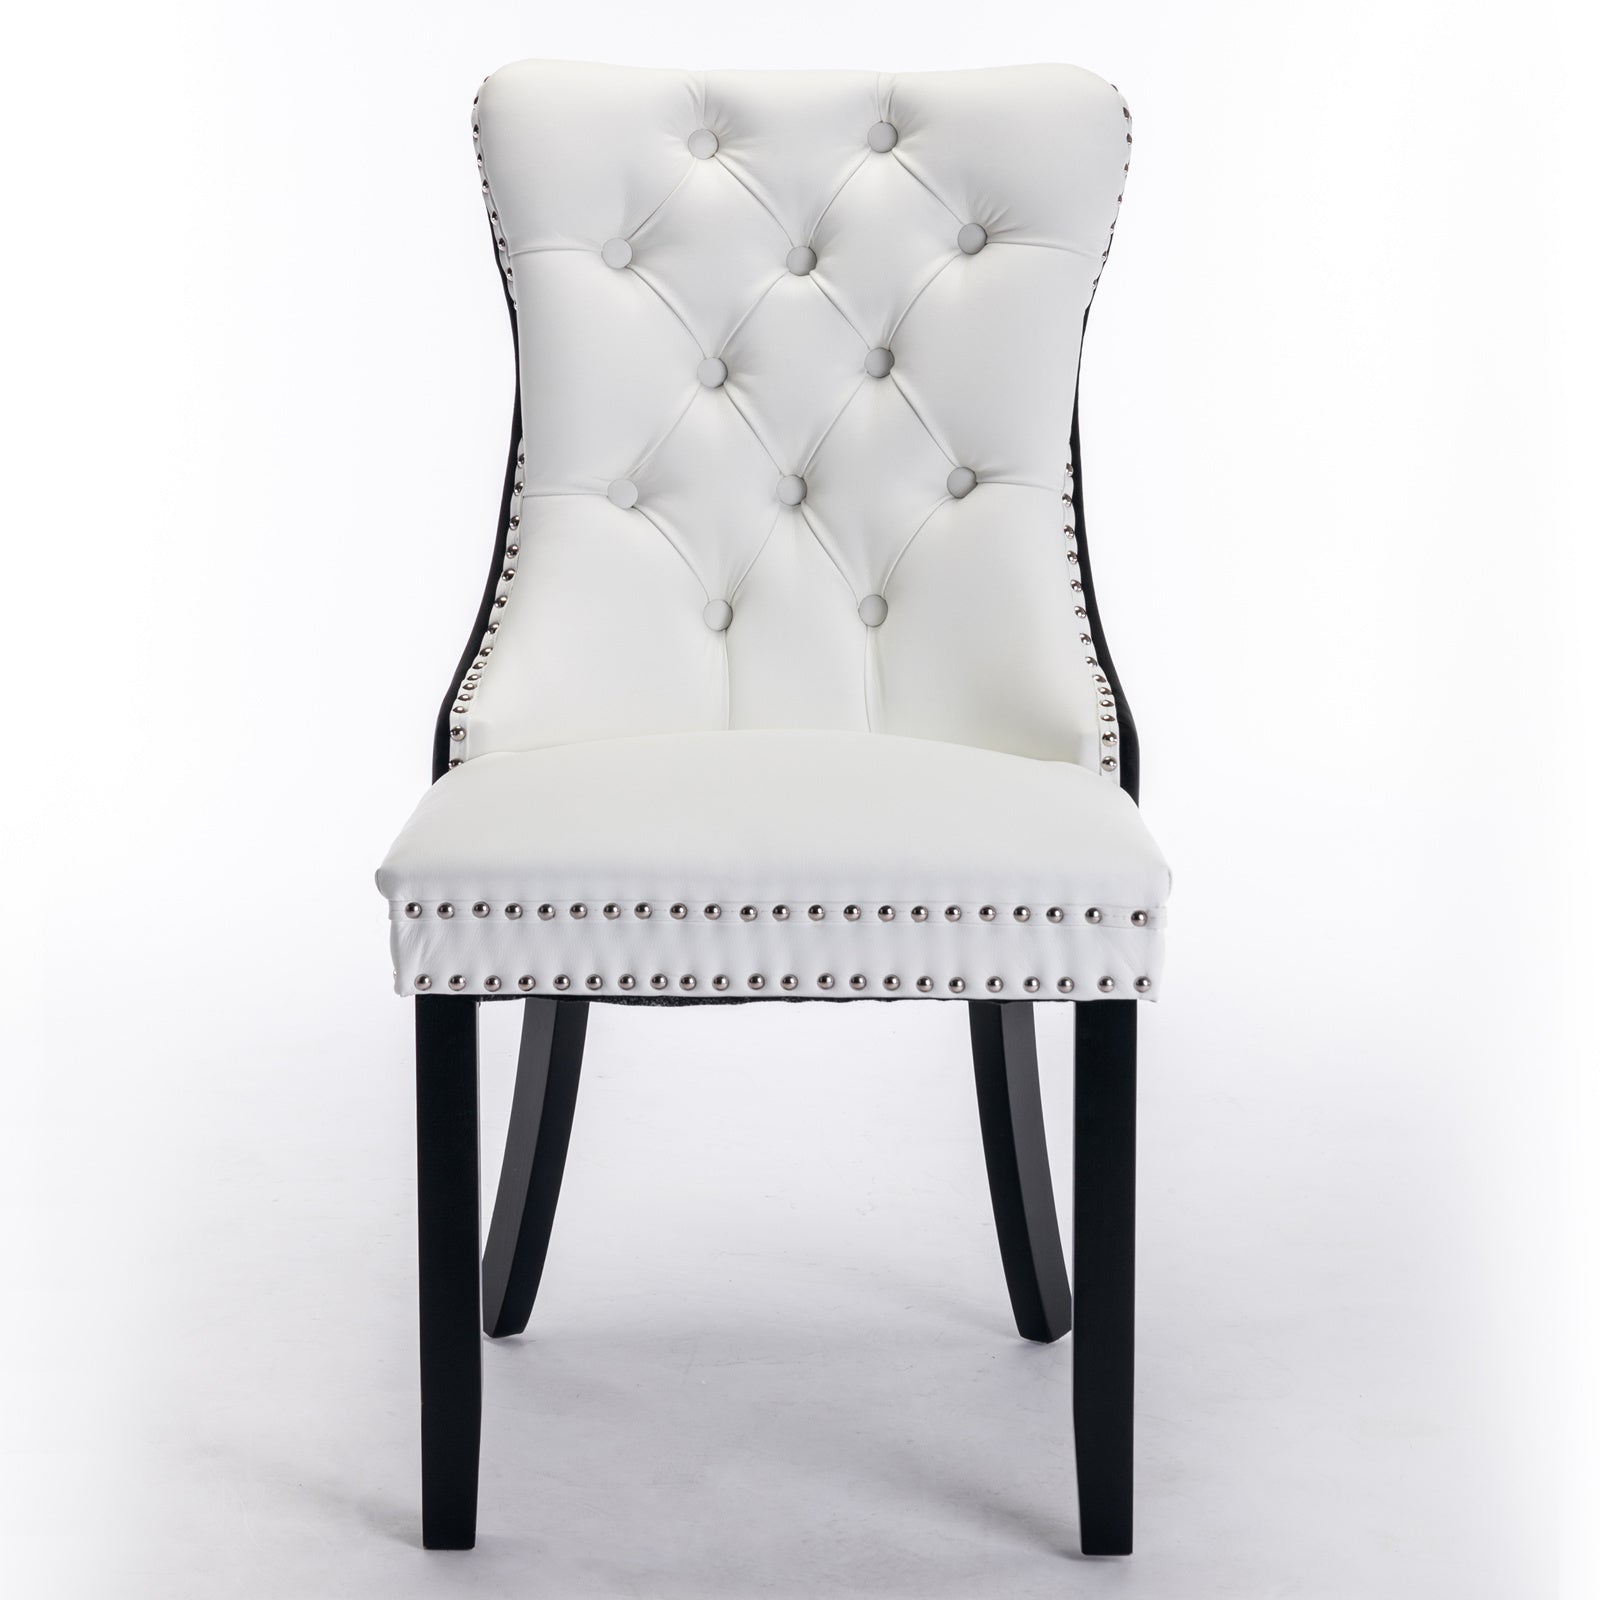 🆓🚛 High-End Tufted Solid Wood Contemporary Pu and Velvet Upholstered Dining Chair With Wood Legs Nailhead Trim 2-Pcs Set, White & Black